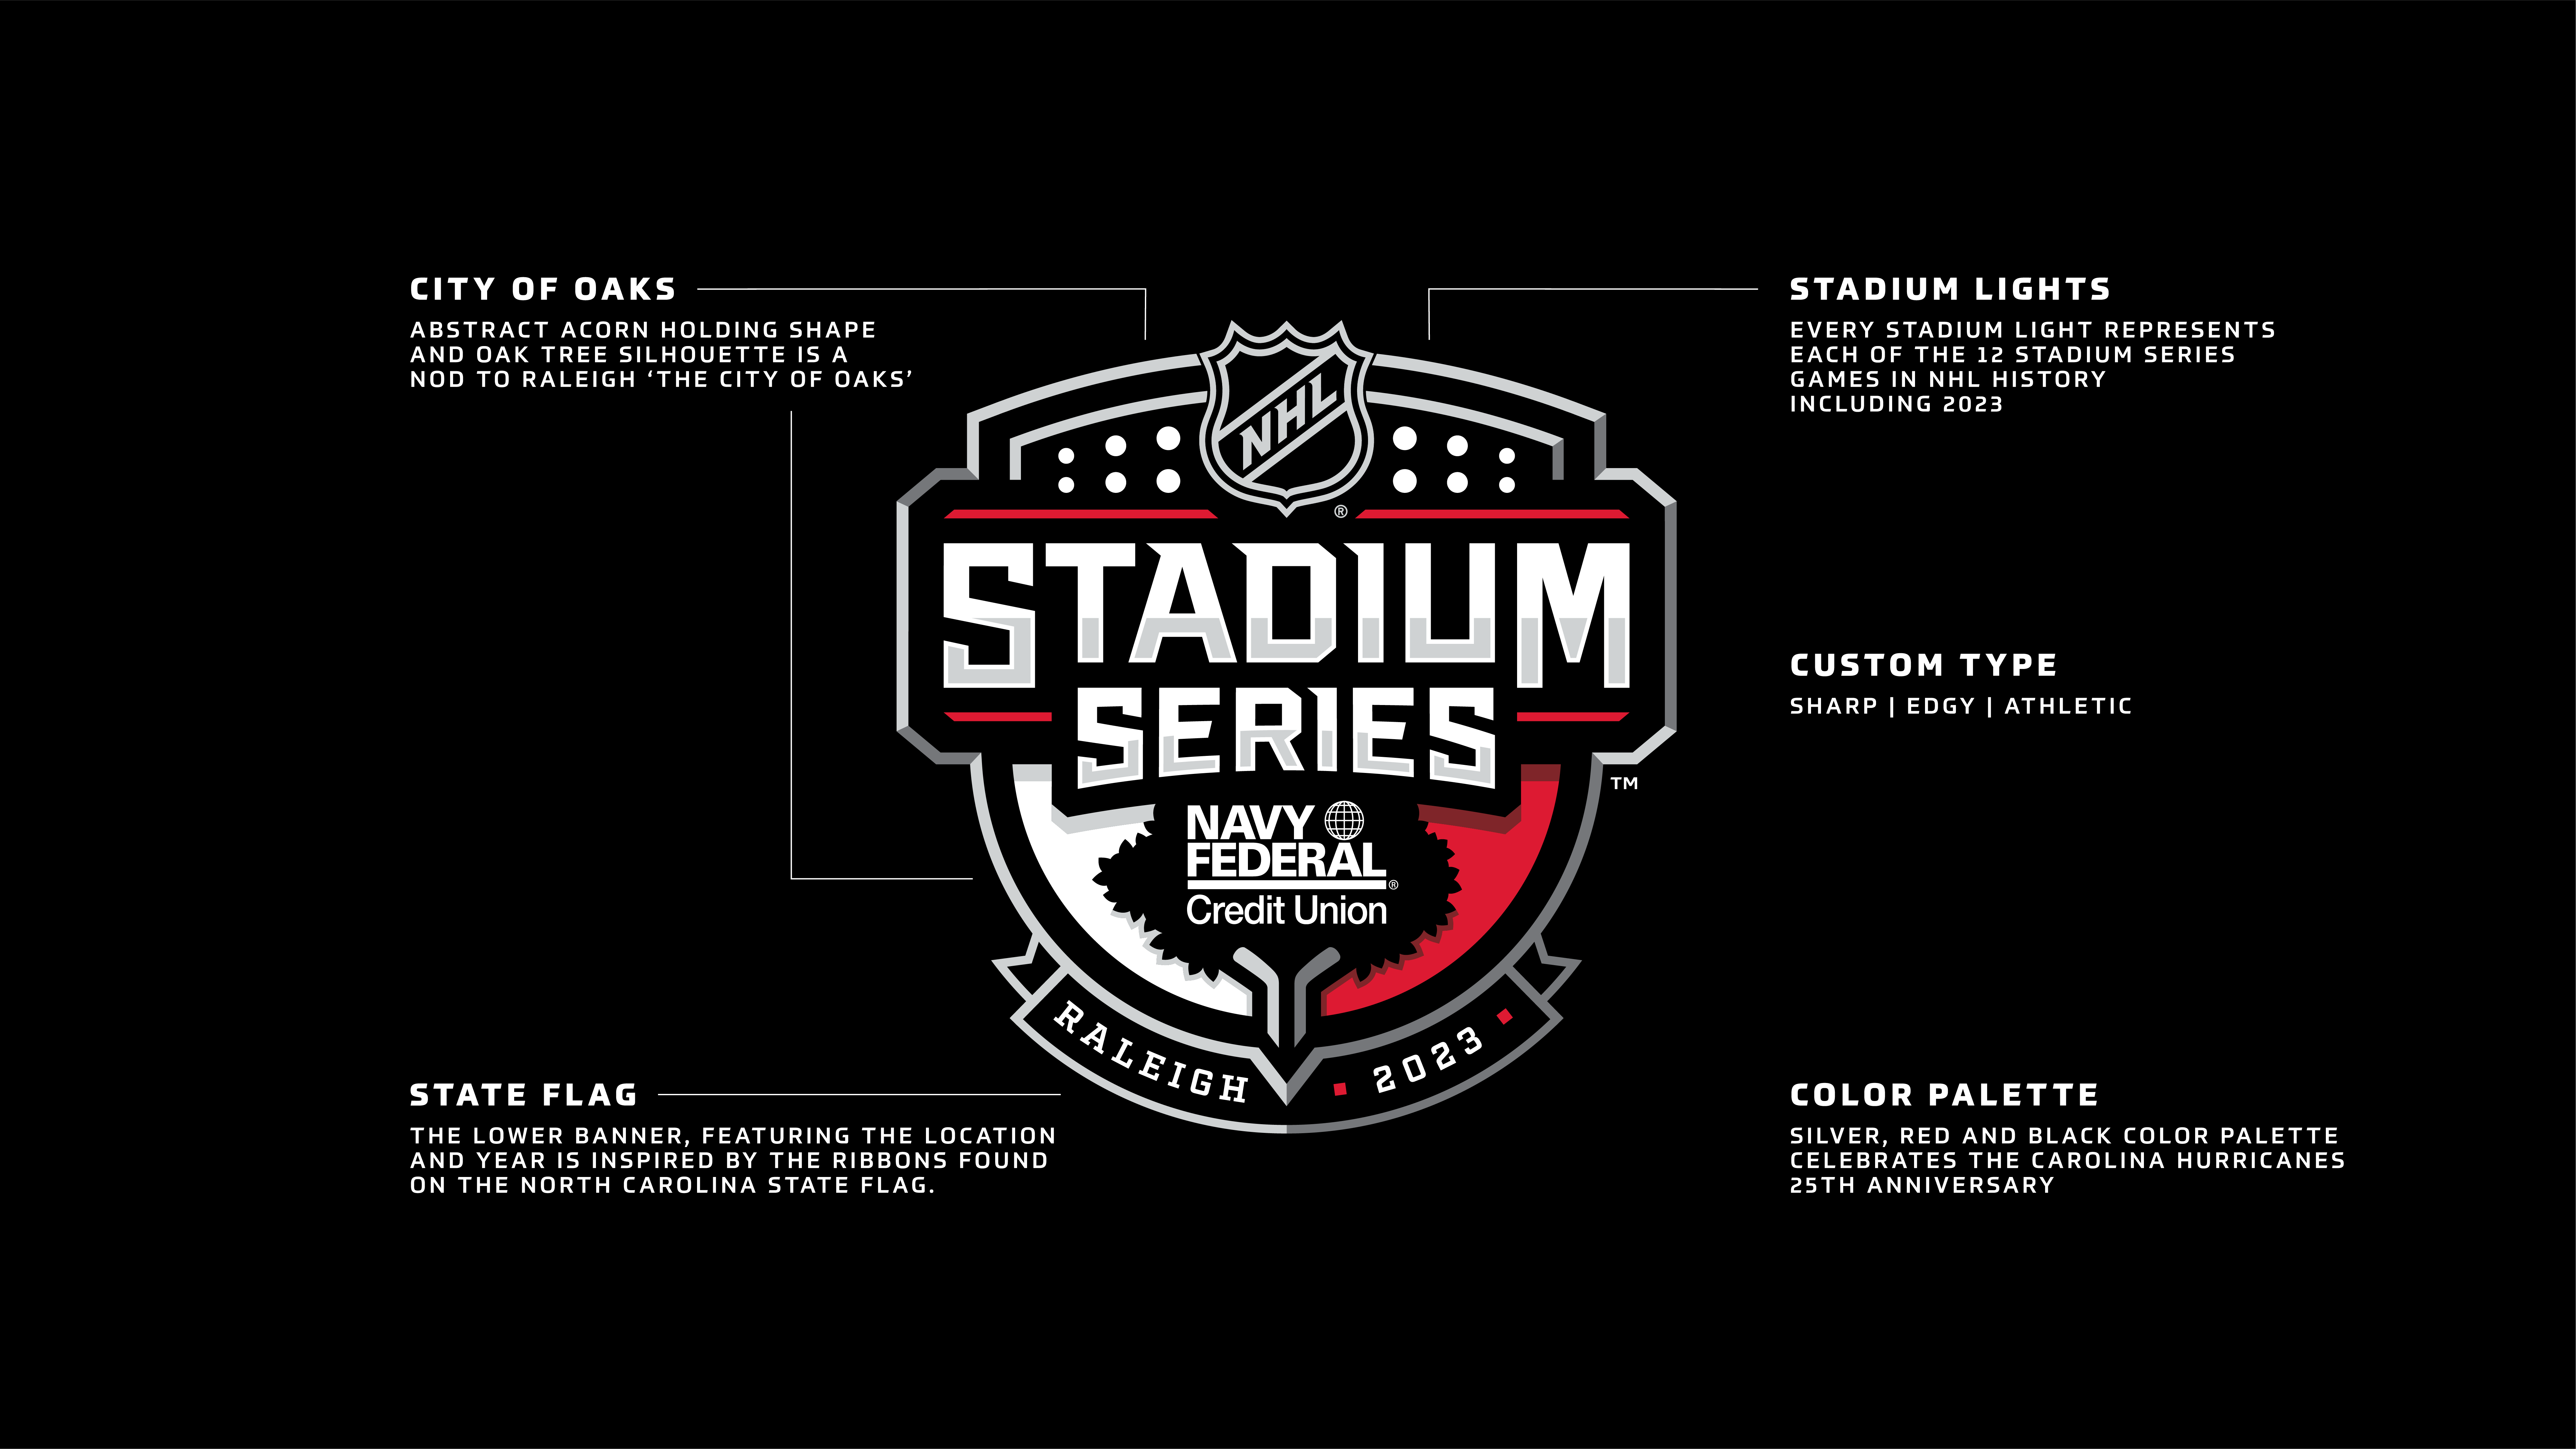 NHL.com Media Site - News - NHL Announces Expanded Calendar of Events and  New Brand Identity for Annual Esports Championship